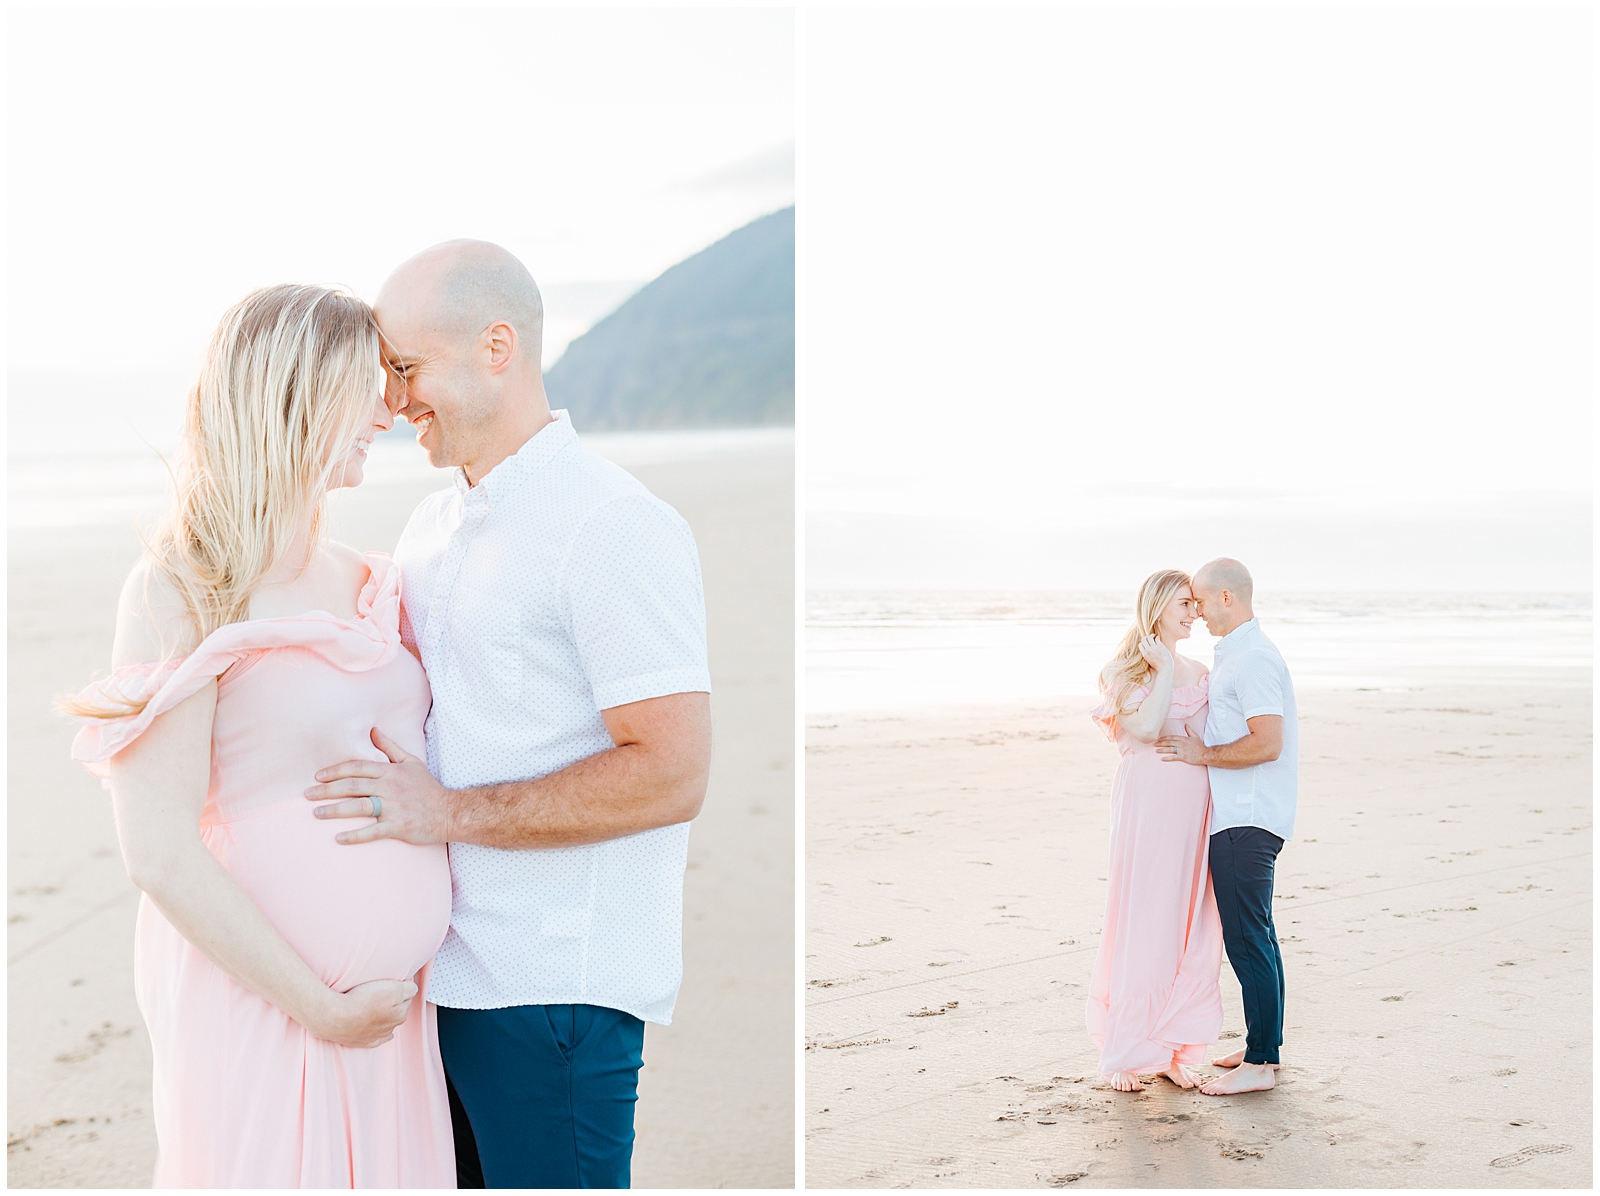 Dreamy Oregon Coast Beach Maternity Session at Golden Hour in Blush Dress